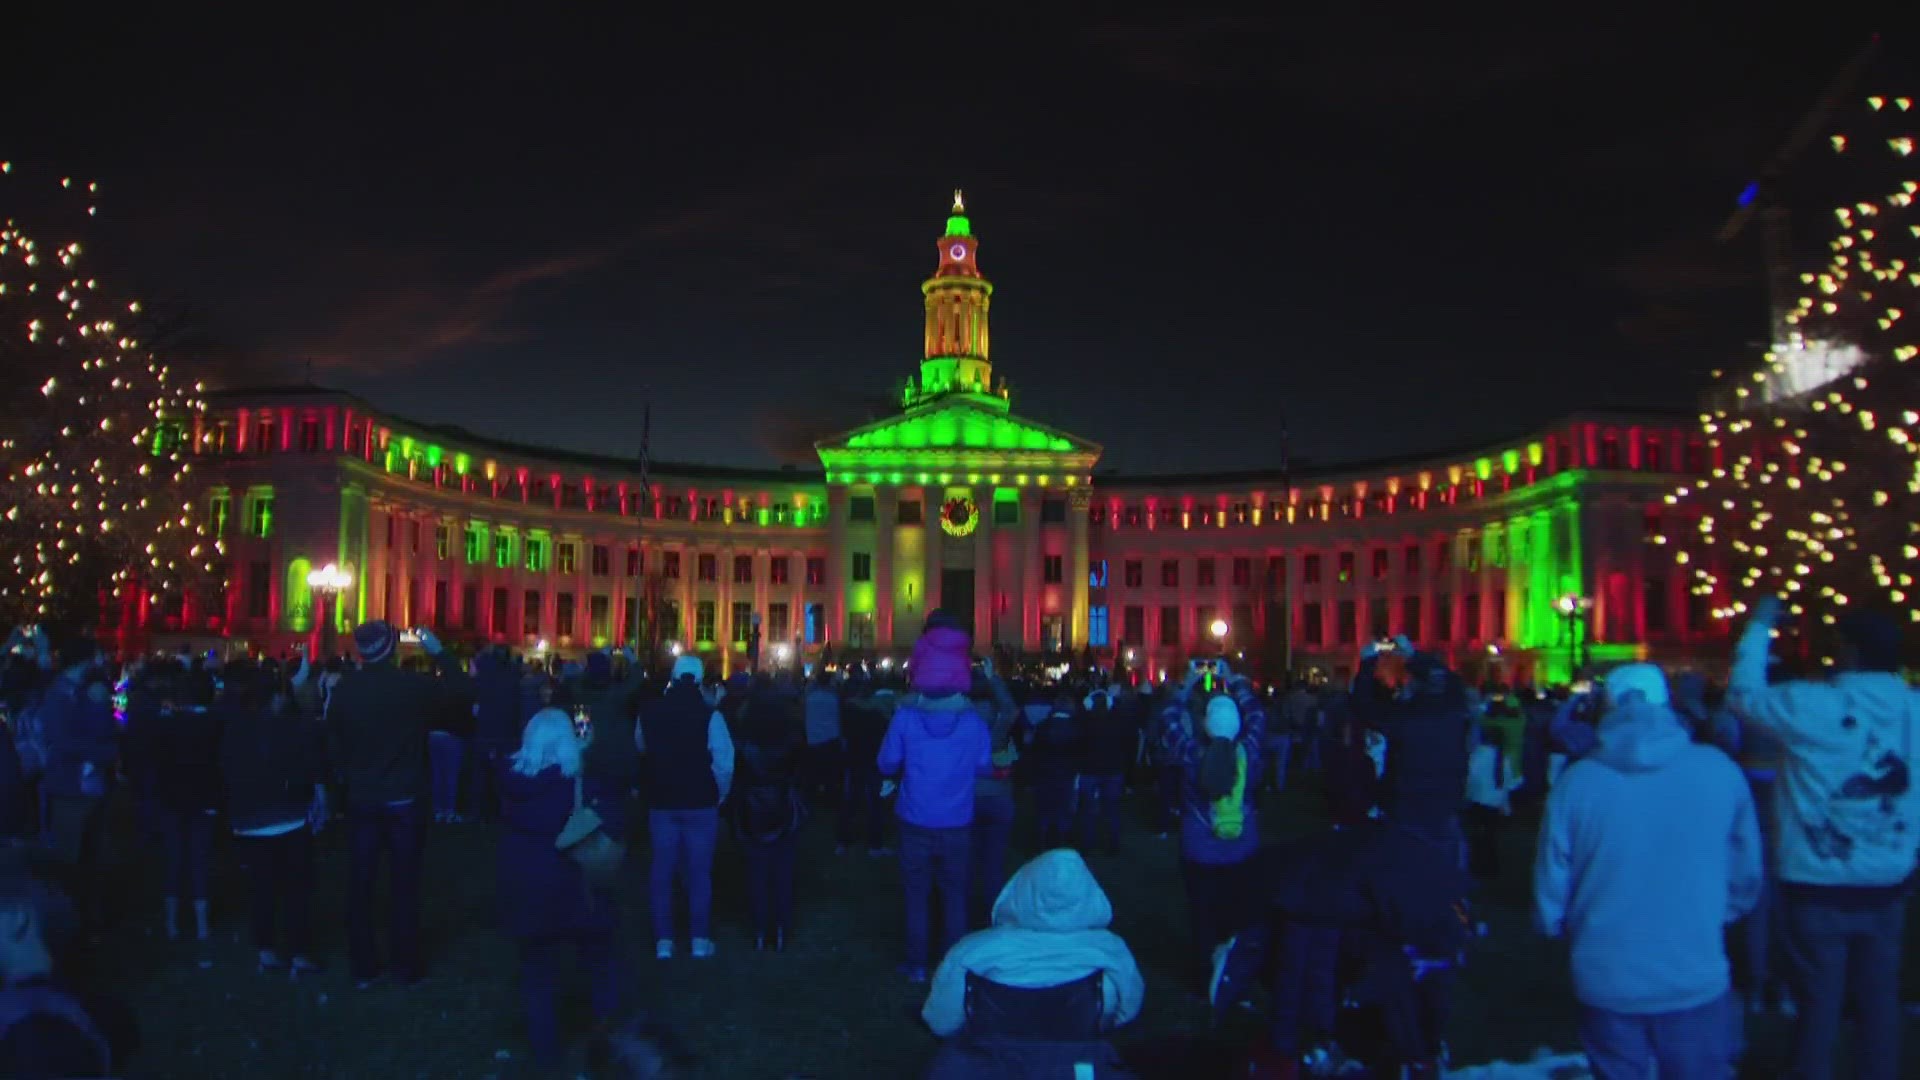 The switch was flipped on the City and County Building to officially light up the holiday season.